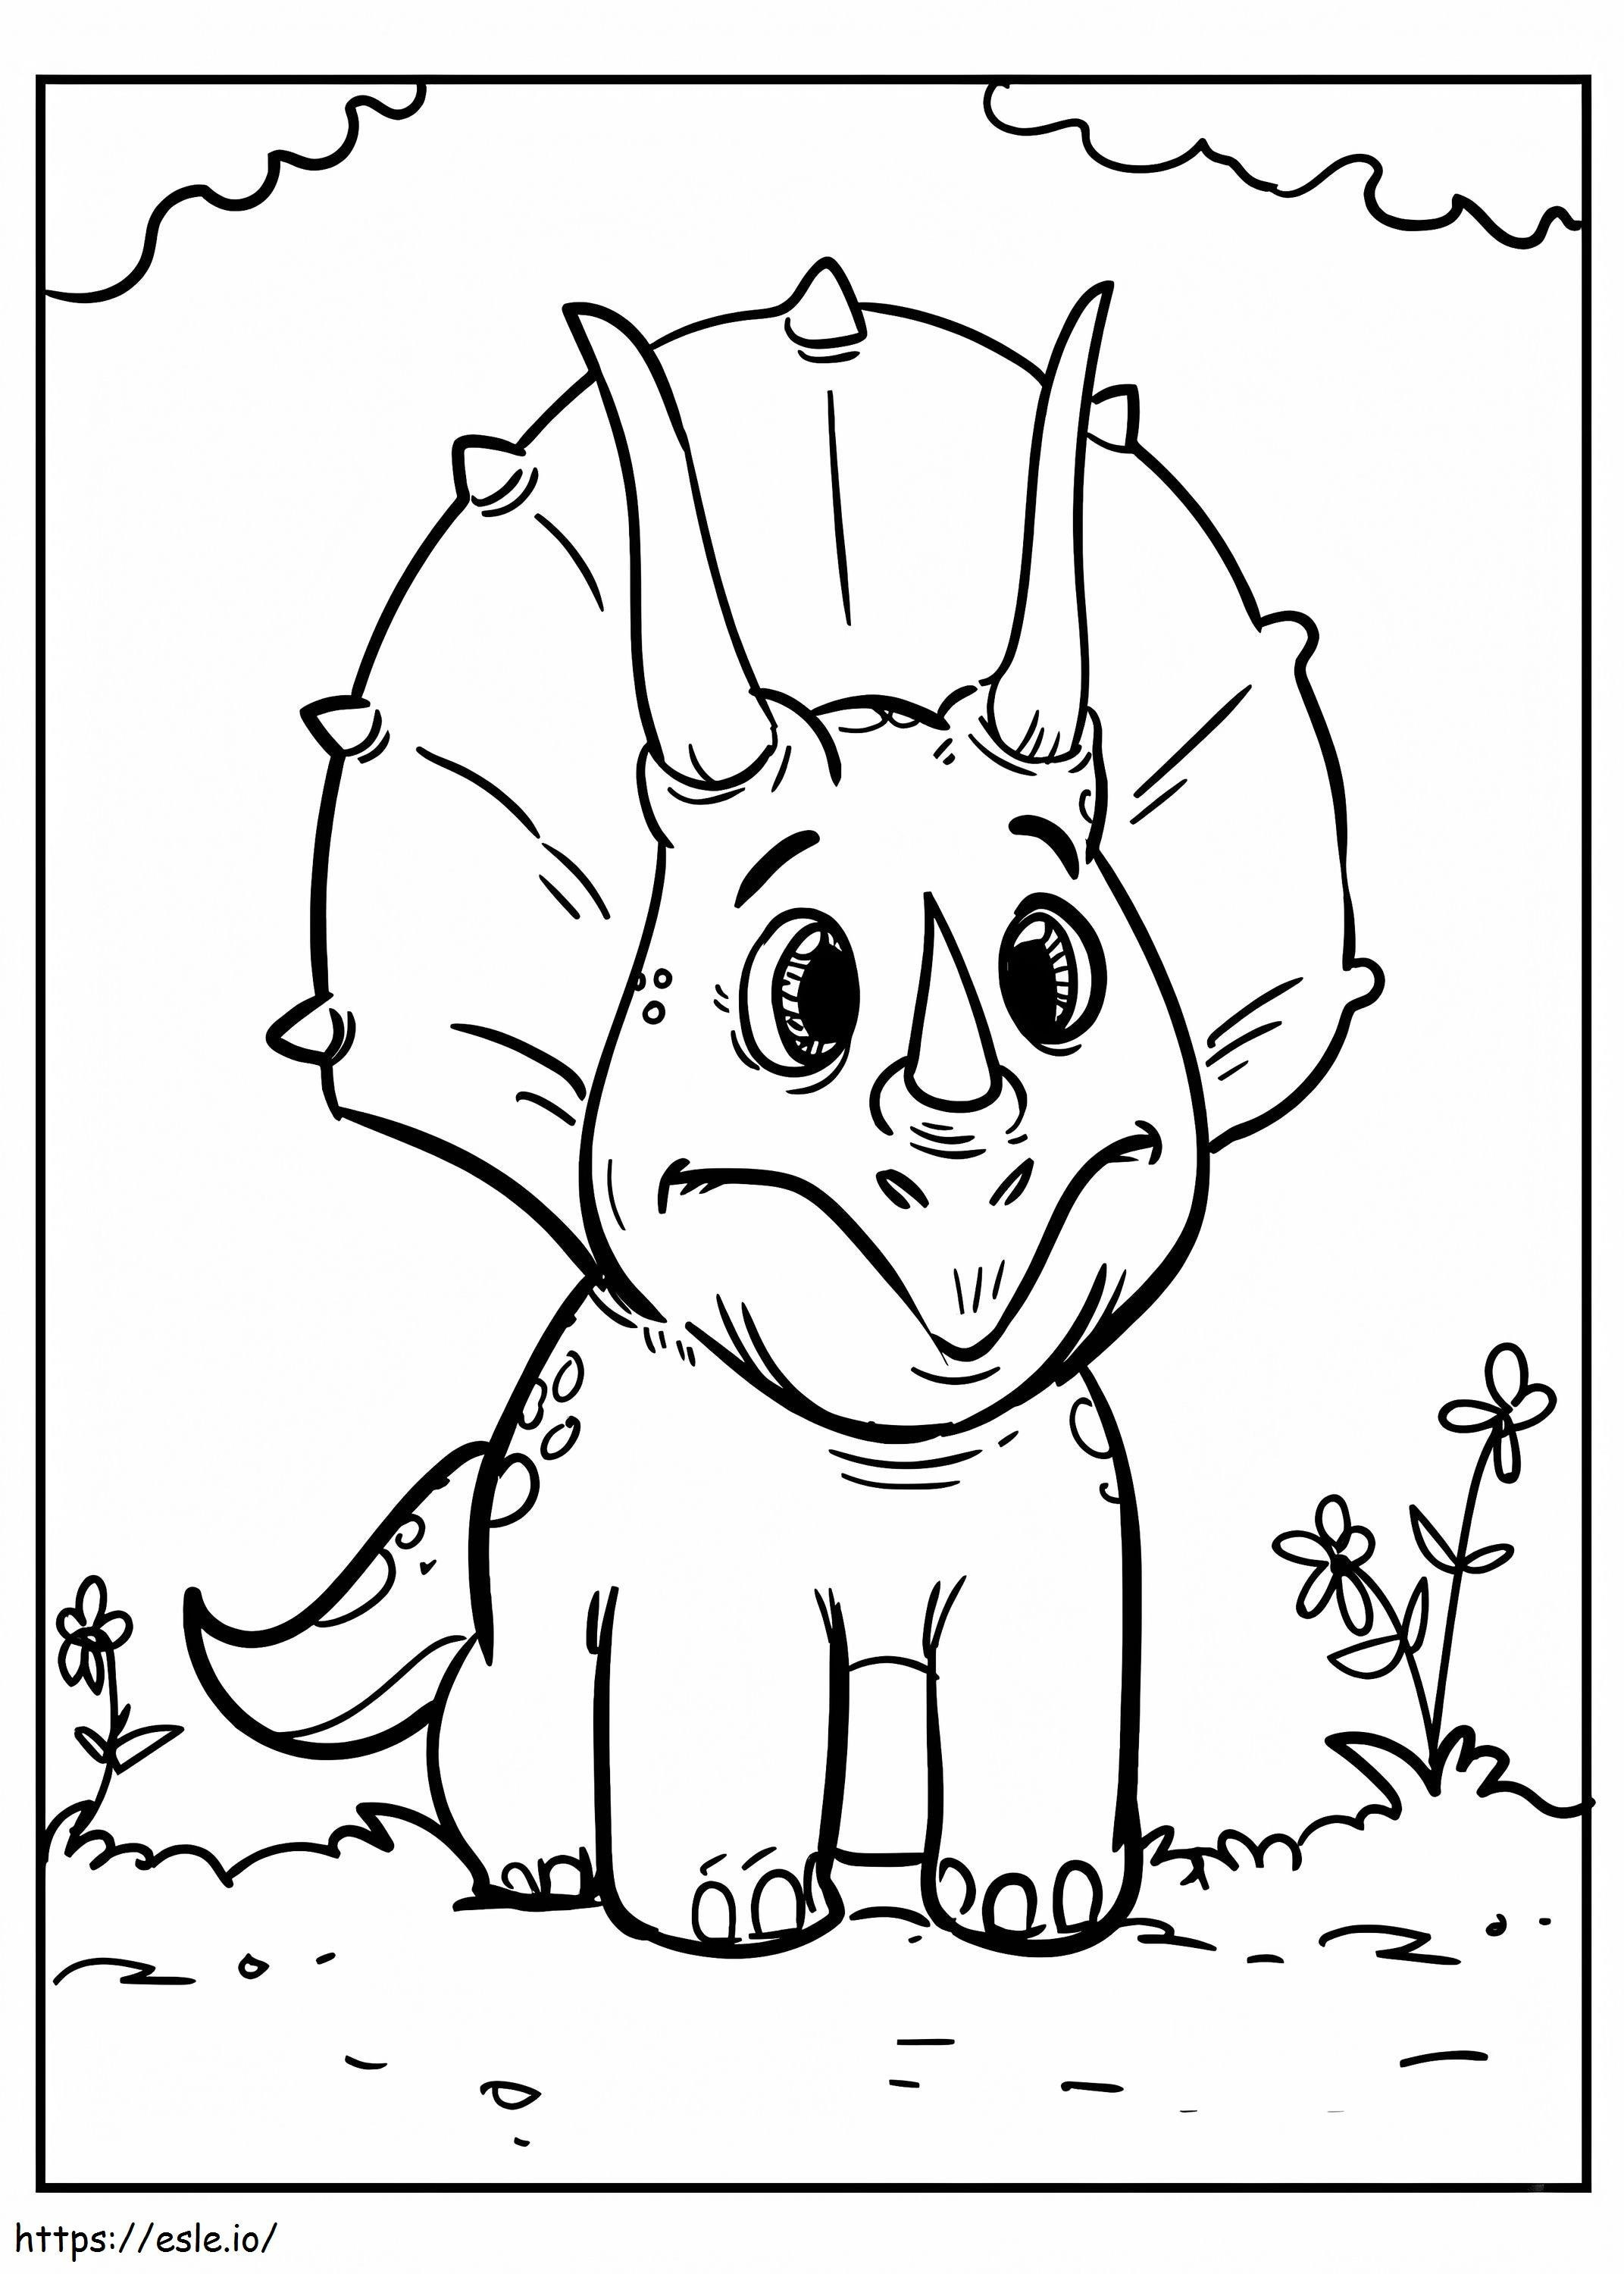 Pie'S Little Triceratop coloring page